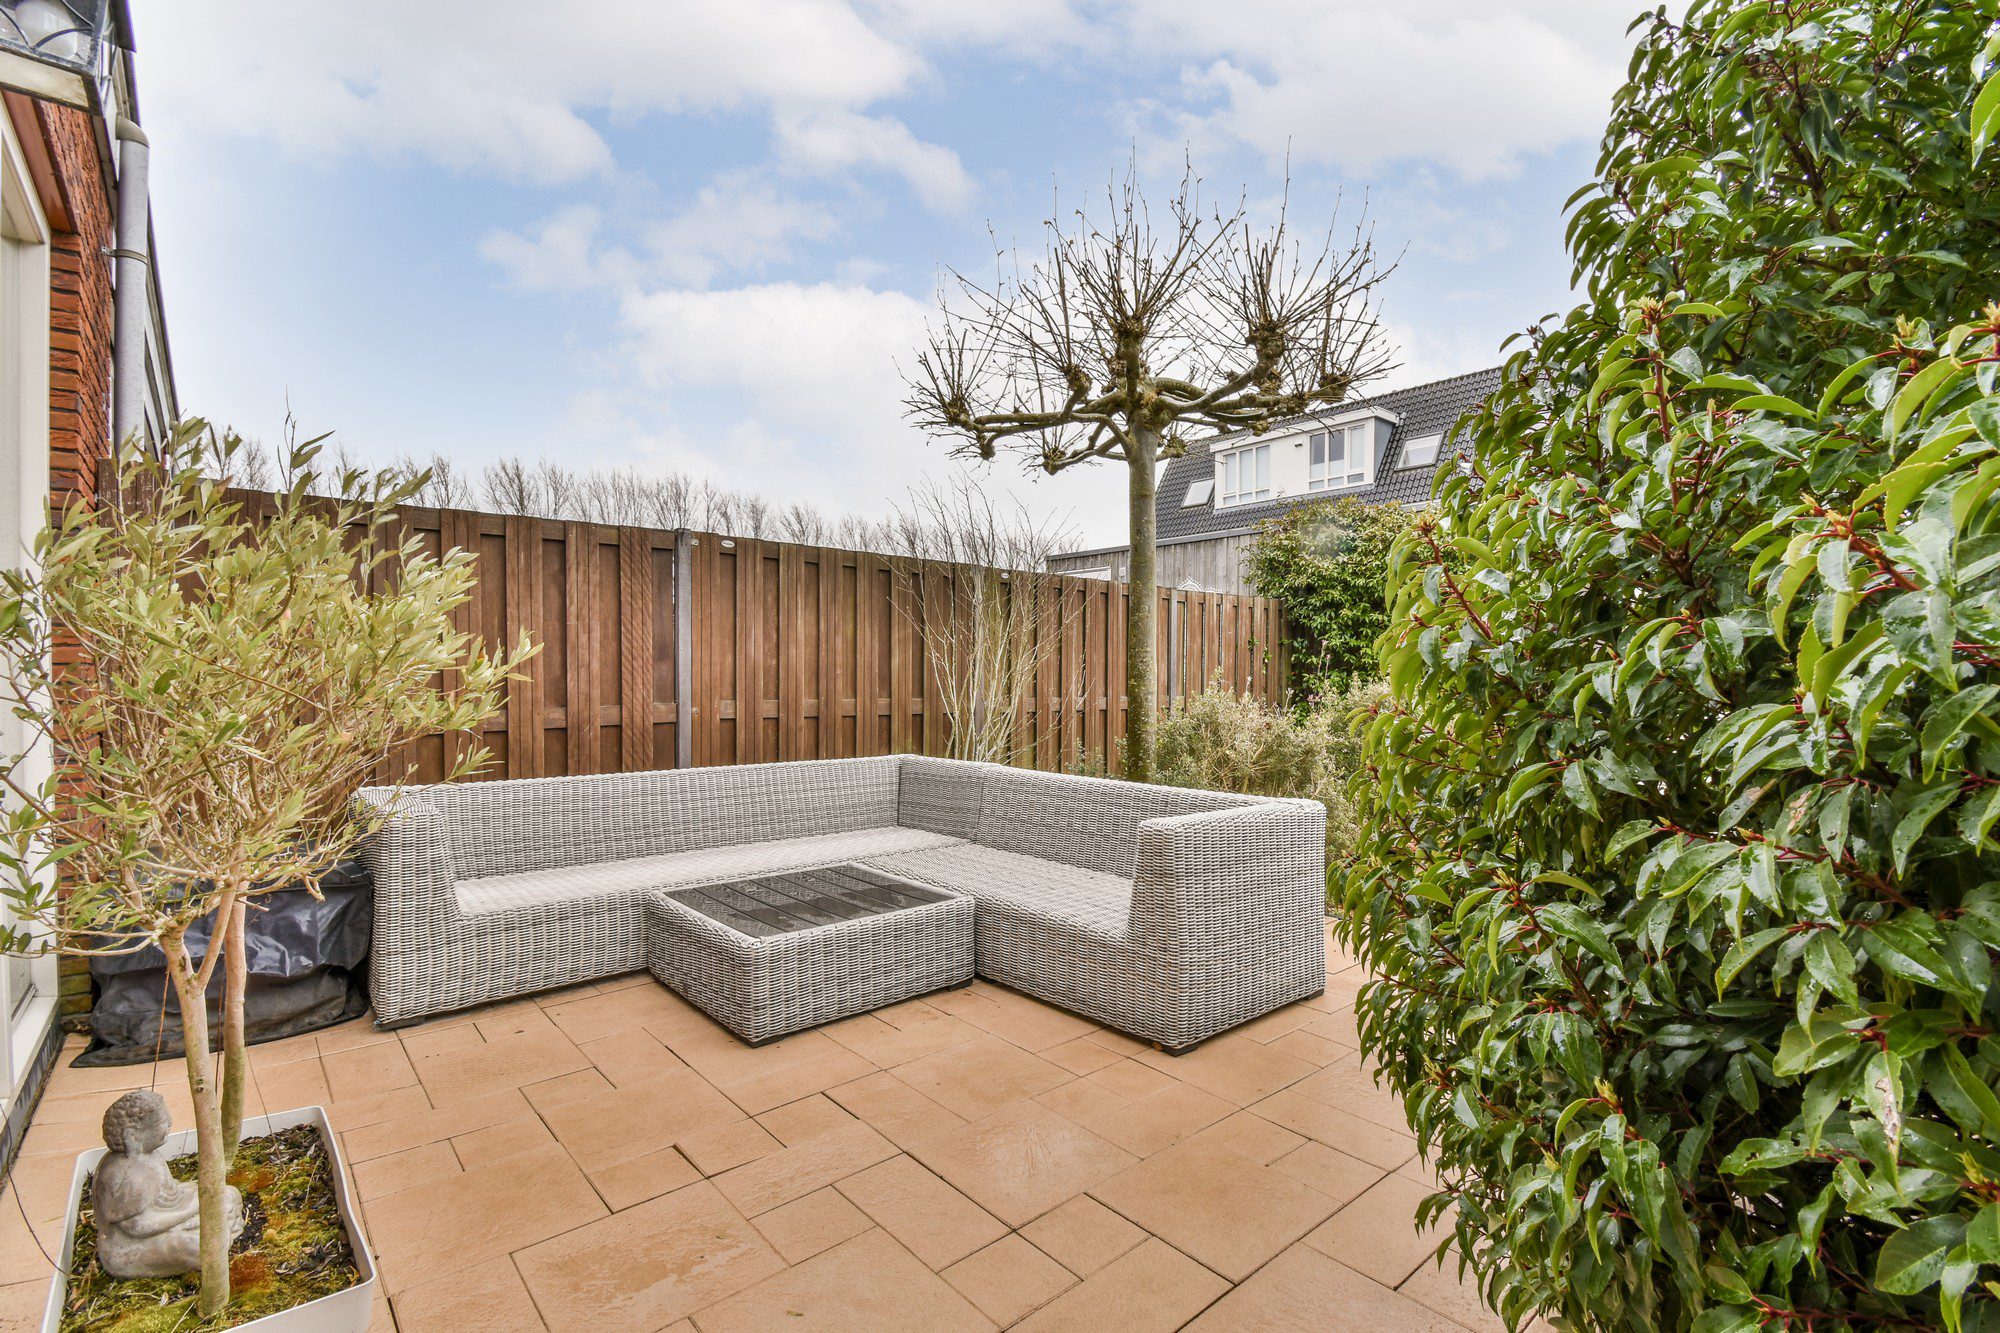 This image depicts a well-kept outdoor patio area in a residential setting. The patio is paved with square terracotta tiles, and there's a contemporary outdoor lounge set that includes a sectional sofa and a matching coffee table, all with a gray wicker design and white cushions.Various ornamental plants and shrubs are around the patio, providing greenery and enhancing the space's aesthetic. On the left, there's a potted olive tree, and in the centre background, we can see a tree that appears to be pruned or dormant without leaves. The area is enclosed with a wooden fence that ensures privacy, and there's also a small sculpture of what seems to be a seated child below the potted olive tree.The sky is partly cloudy, suggesting that the weather is fair, yet it does not appear to be particularly warm as the trees are without leaves, which could indicate the season is either late autumn or winter. The houses in the background have a European style to the architecture, suggesting this might be a backyard in Europe.